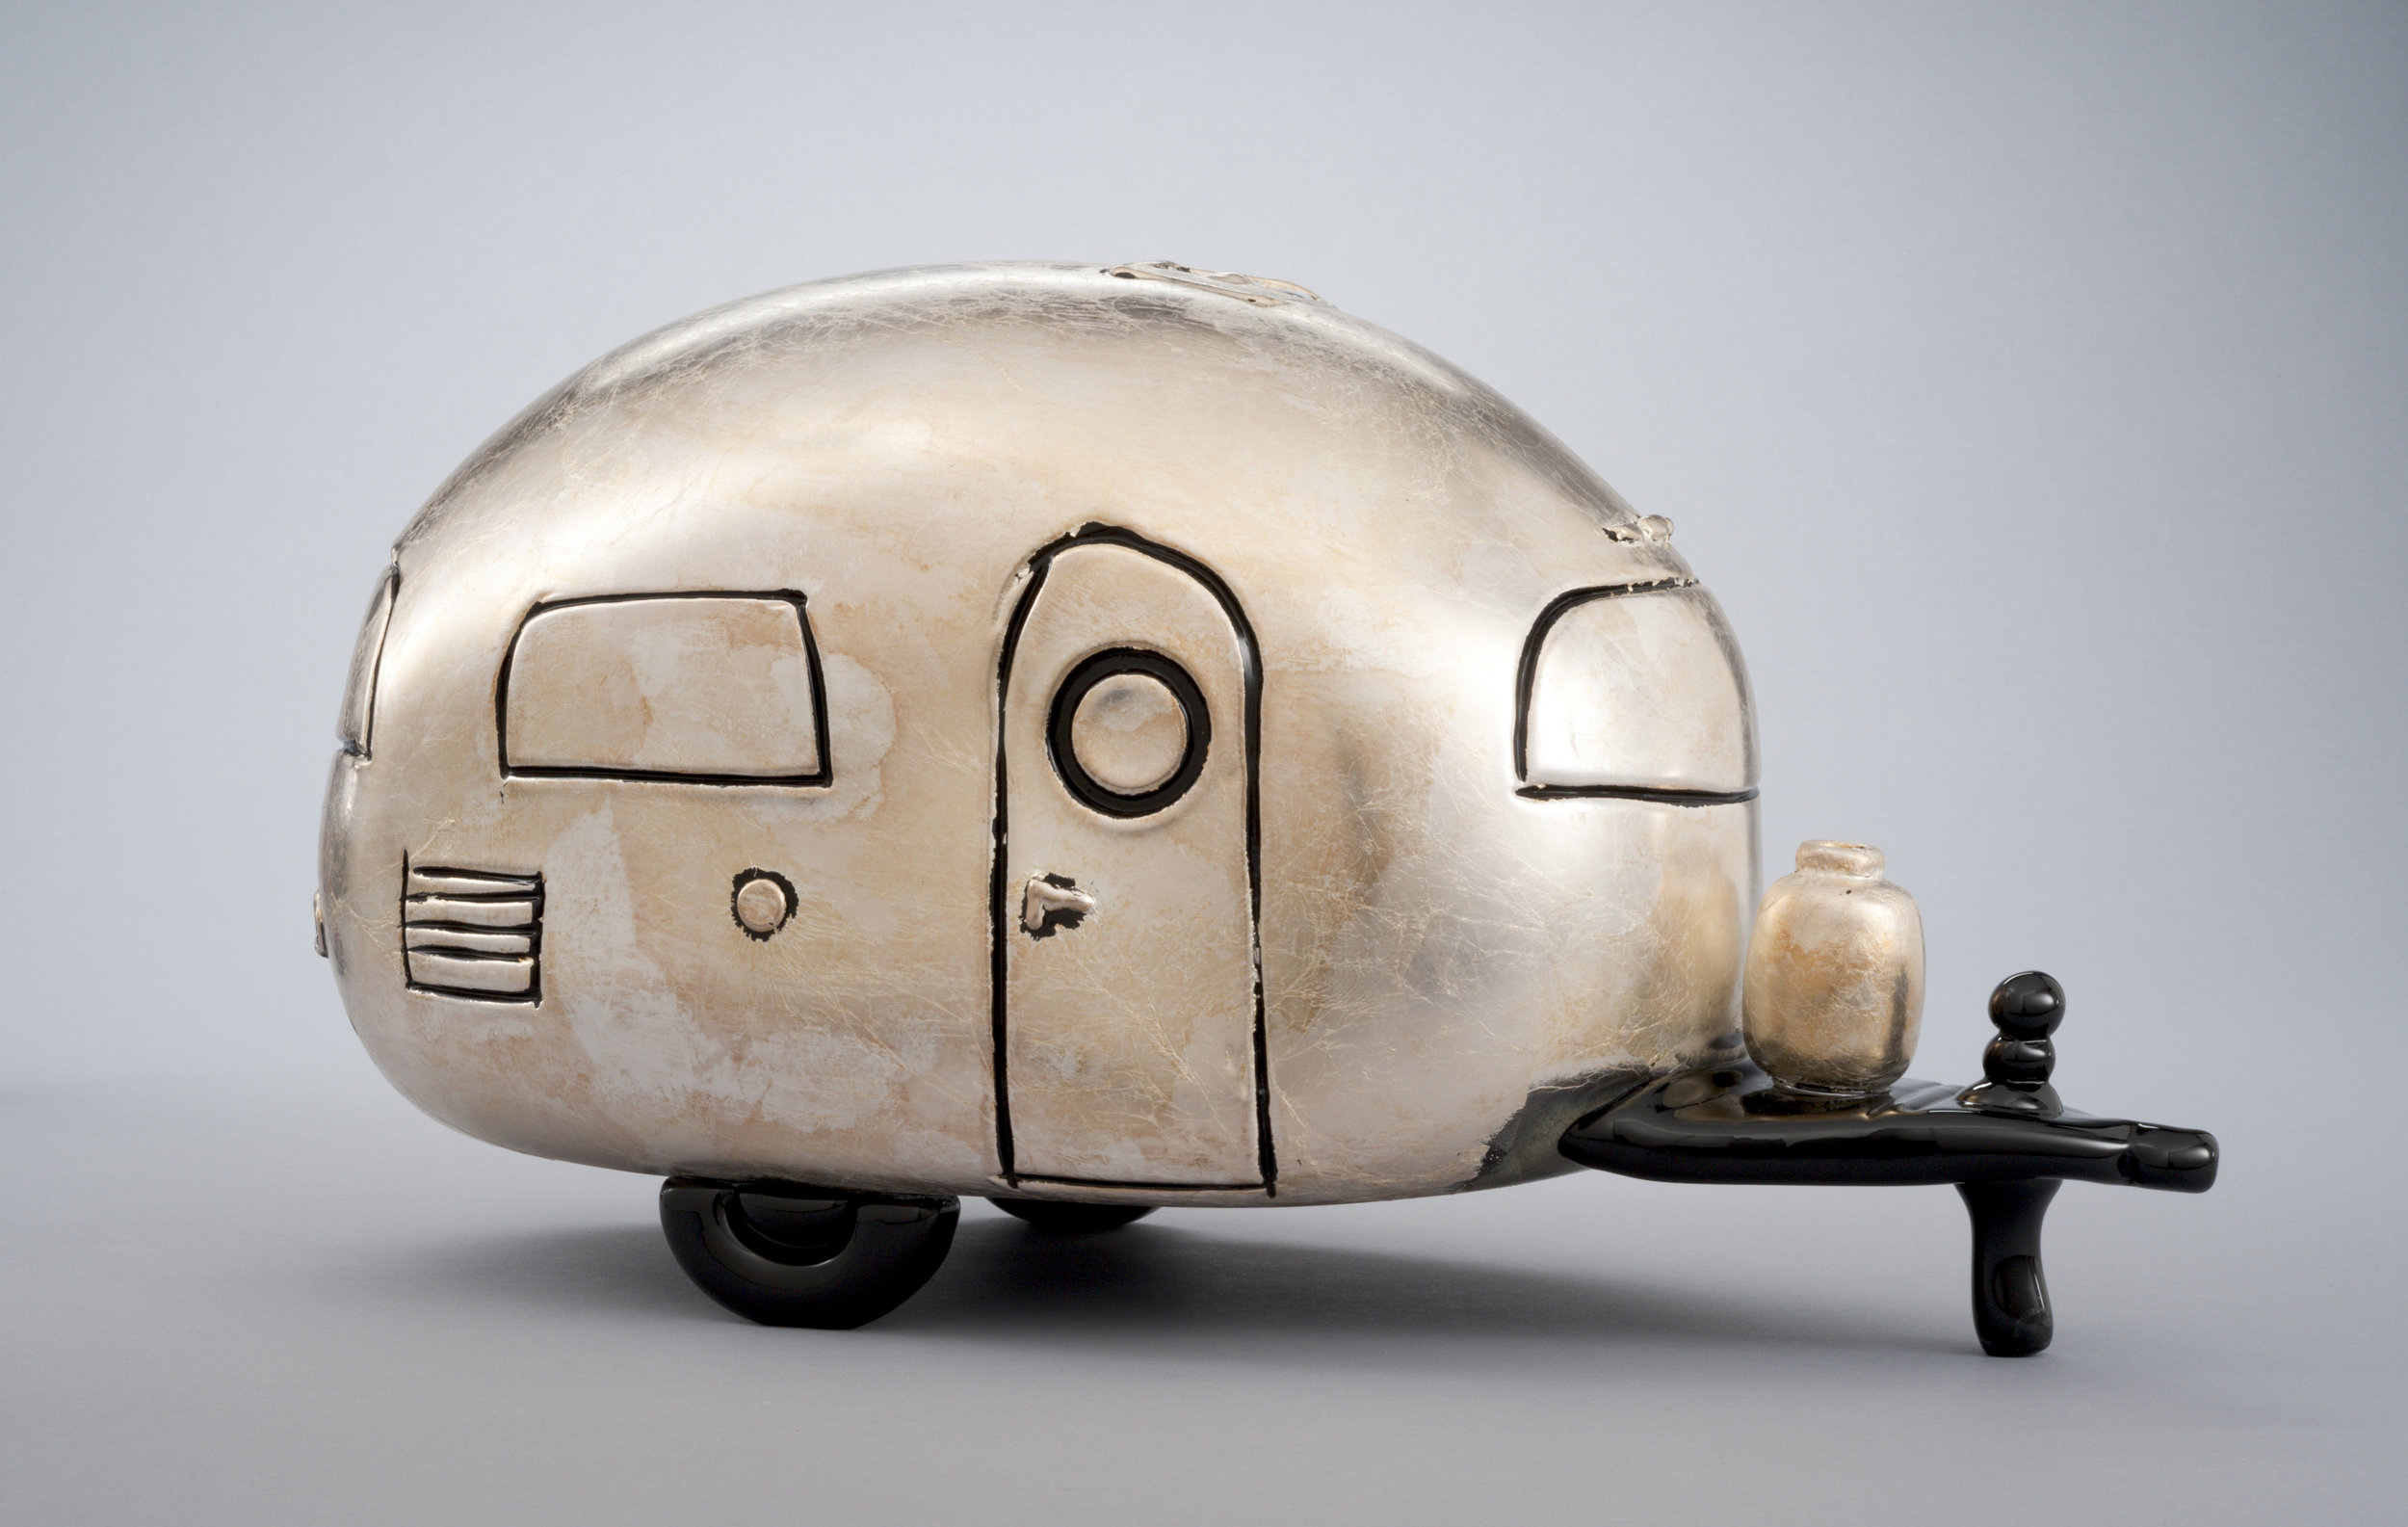  Alex Stisser (American, born 1974).&nbsp; Silver Loaf,  Made at the Museum in 2010.&nbsp;Blown glass and silver foil;&nbsp;8 1/2 x 17 x 7 3/4 in.&nbsp;Collection of Museum of Glass, Tacoma, Washington, gift of the artist.&nbsp;Photo by Duncan Price.